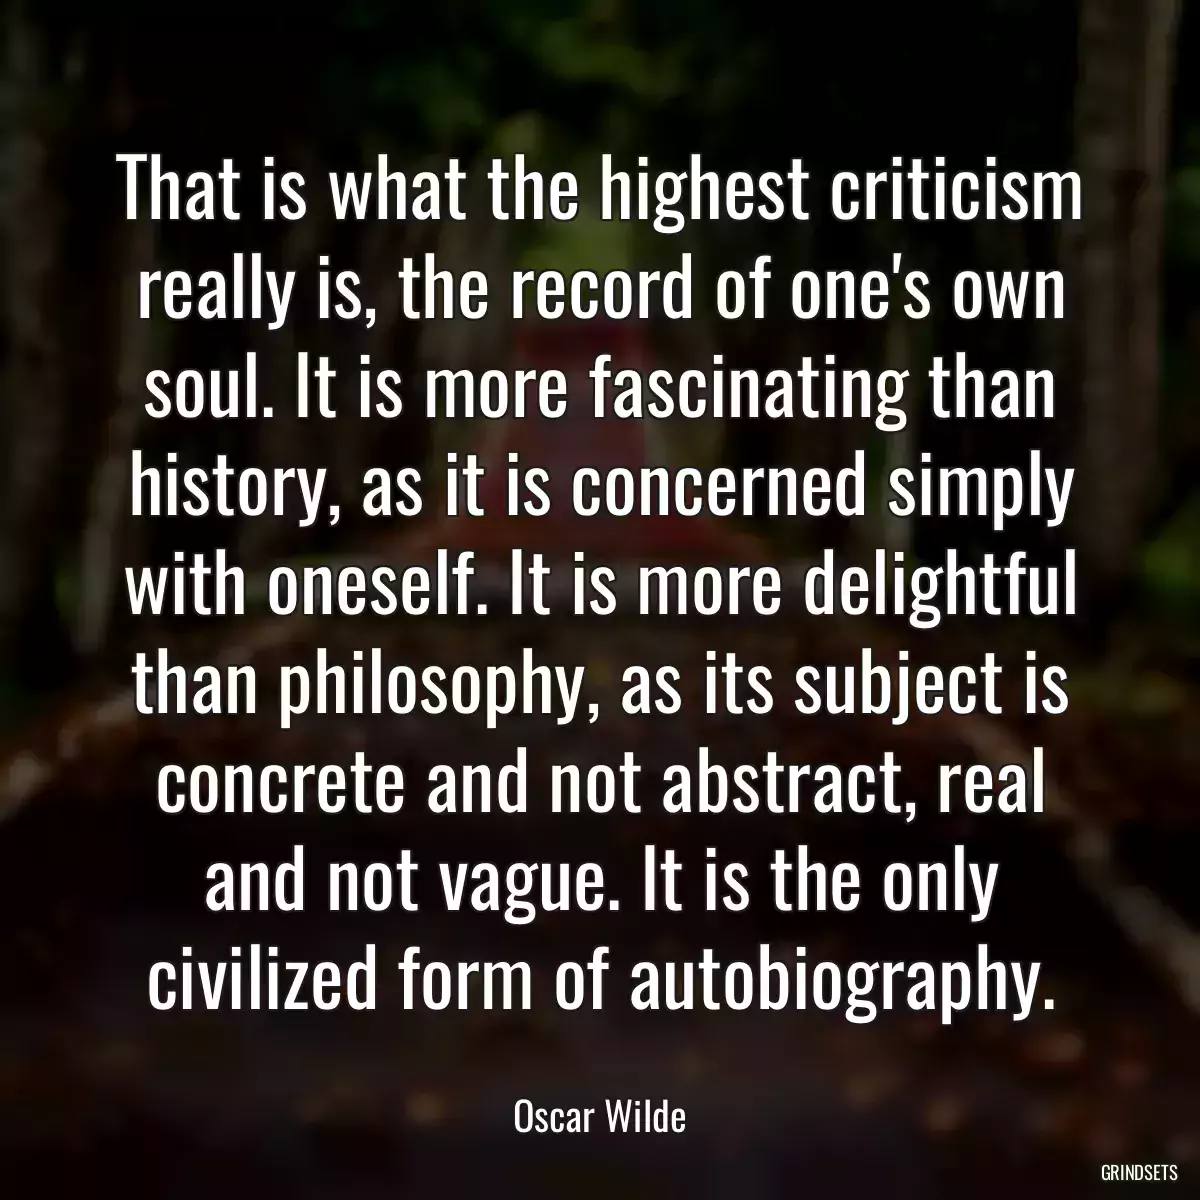 That is what the highest criticism really is, the record of one\'s own soul. It is more fascinating than history, as it is concerned simply with oneself. It is more delightful than philosophy, as its subject is concrete and not abstract, real and not vague. It is the only civilized form of autobiography.